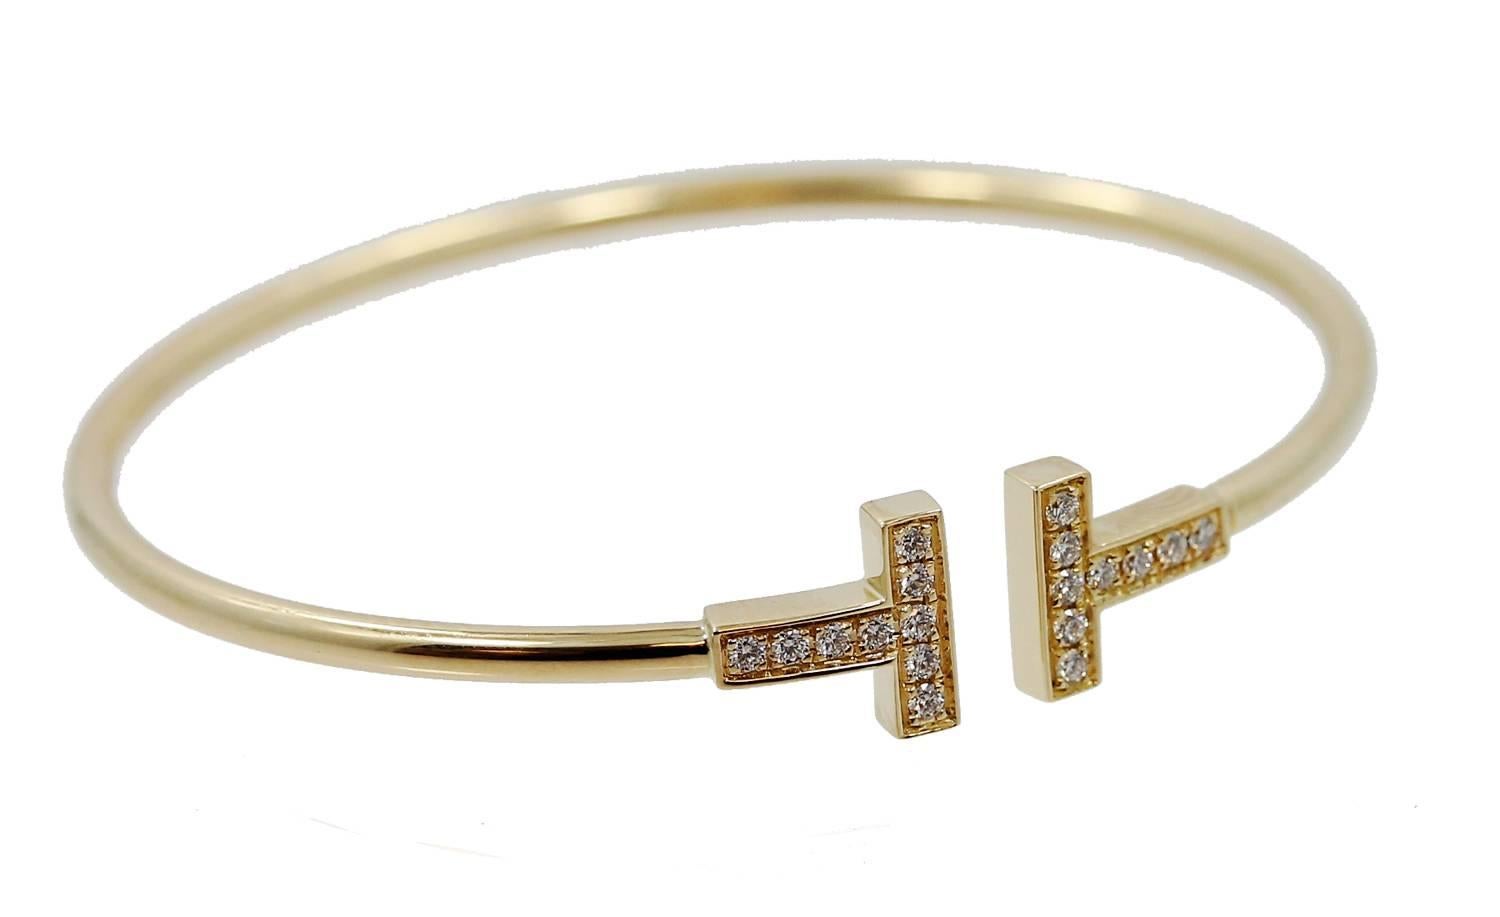 18K Yellow Gold Tiffany & Co. T Gold Bracelet with Diamonds weighing a total of .22 carats. This bracelet is a size medium and fits a wrist up to 6.25